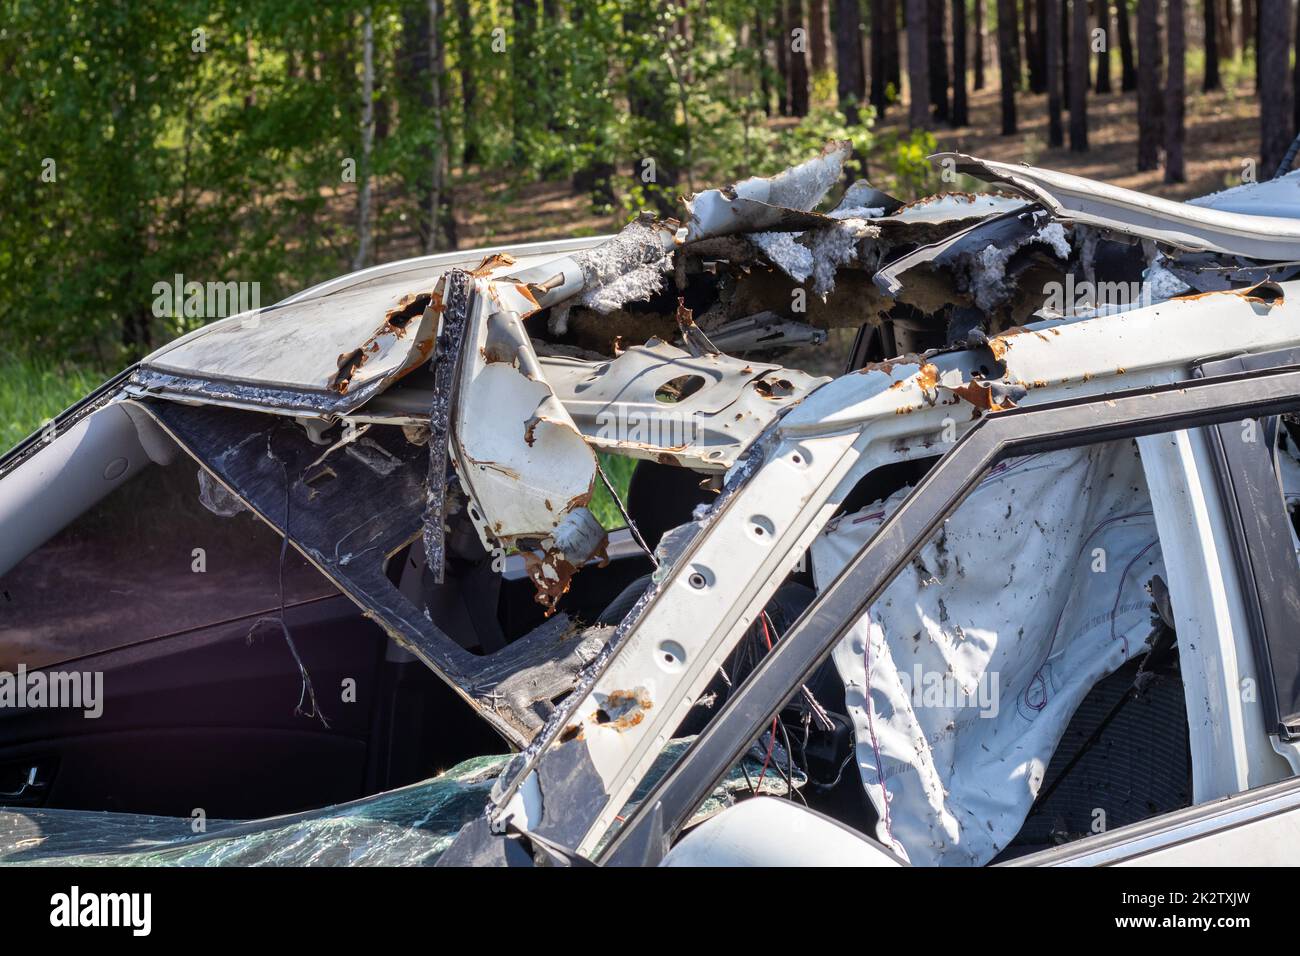 The remains of a civilian car, which was shot and destroyed by shell fragments. The actions of the Russian army during the evacuation of women and children during the Russian invasion of Ukraine. Stock Photo